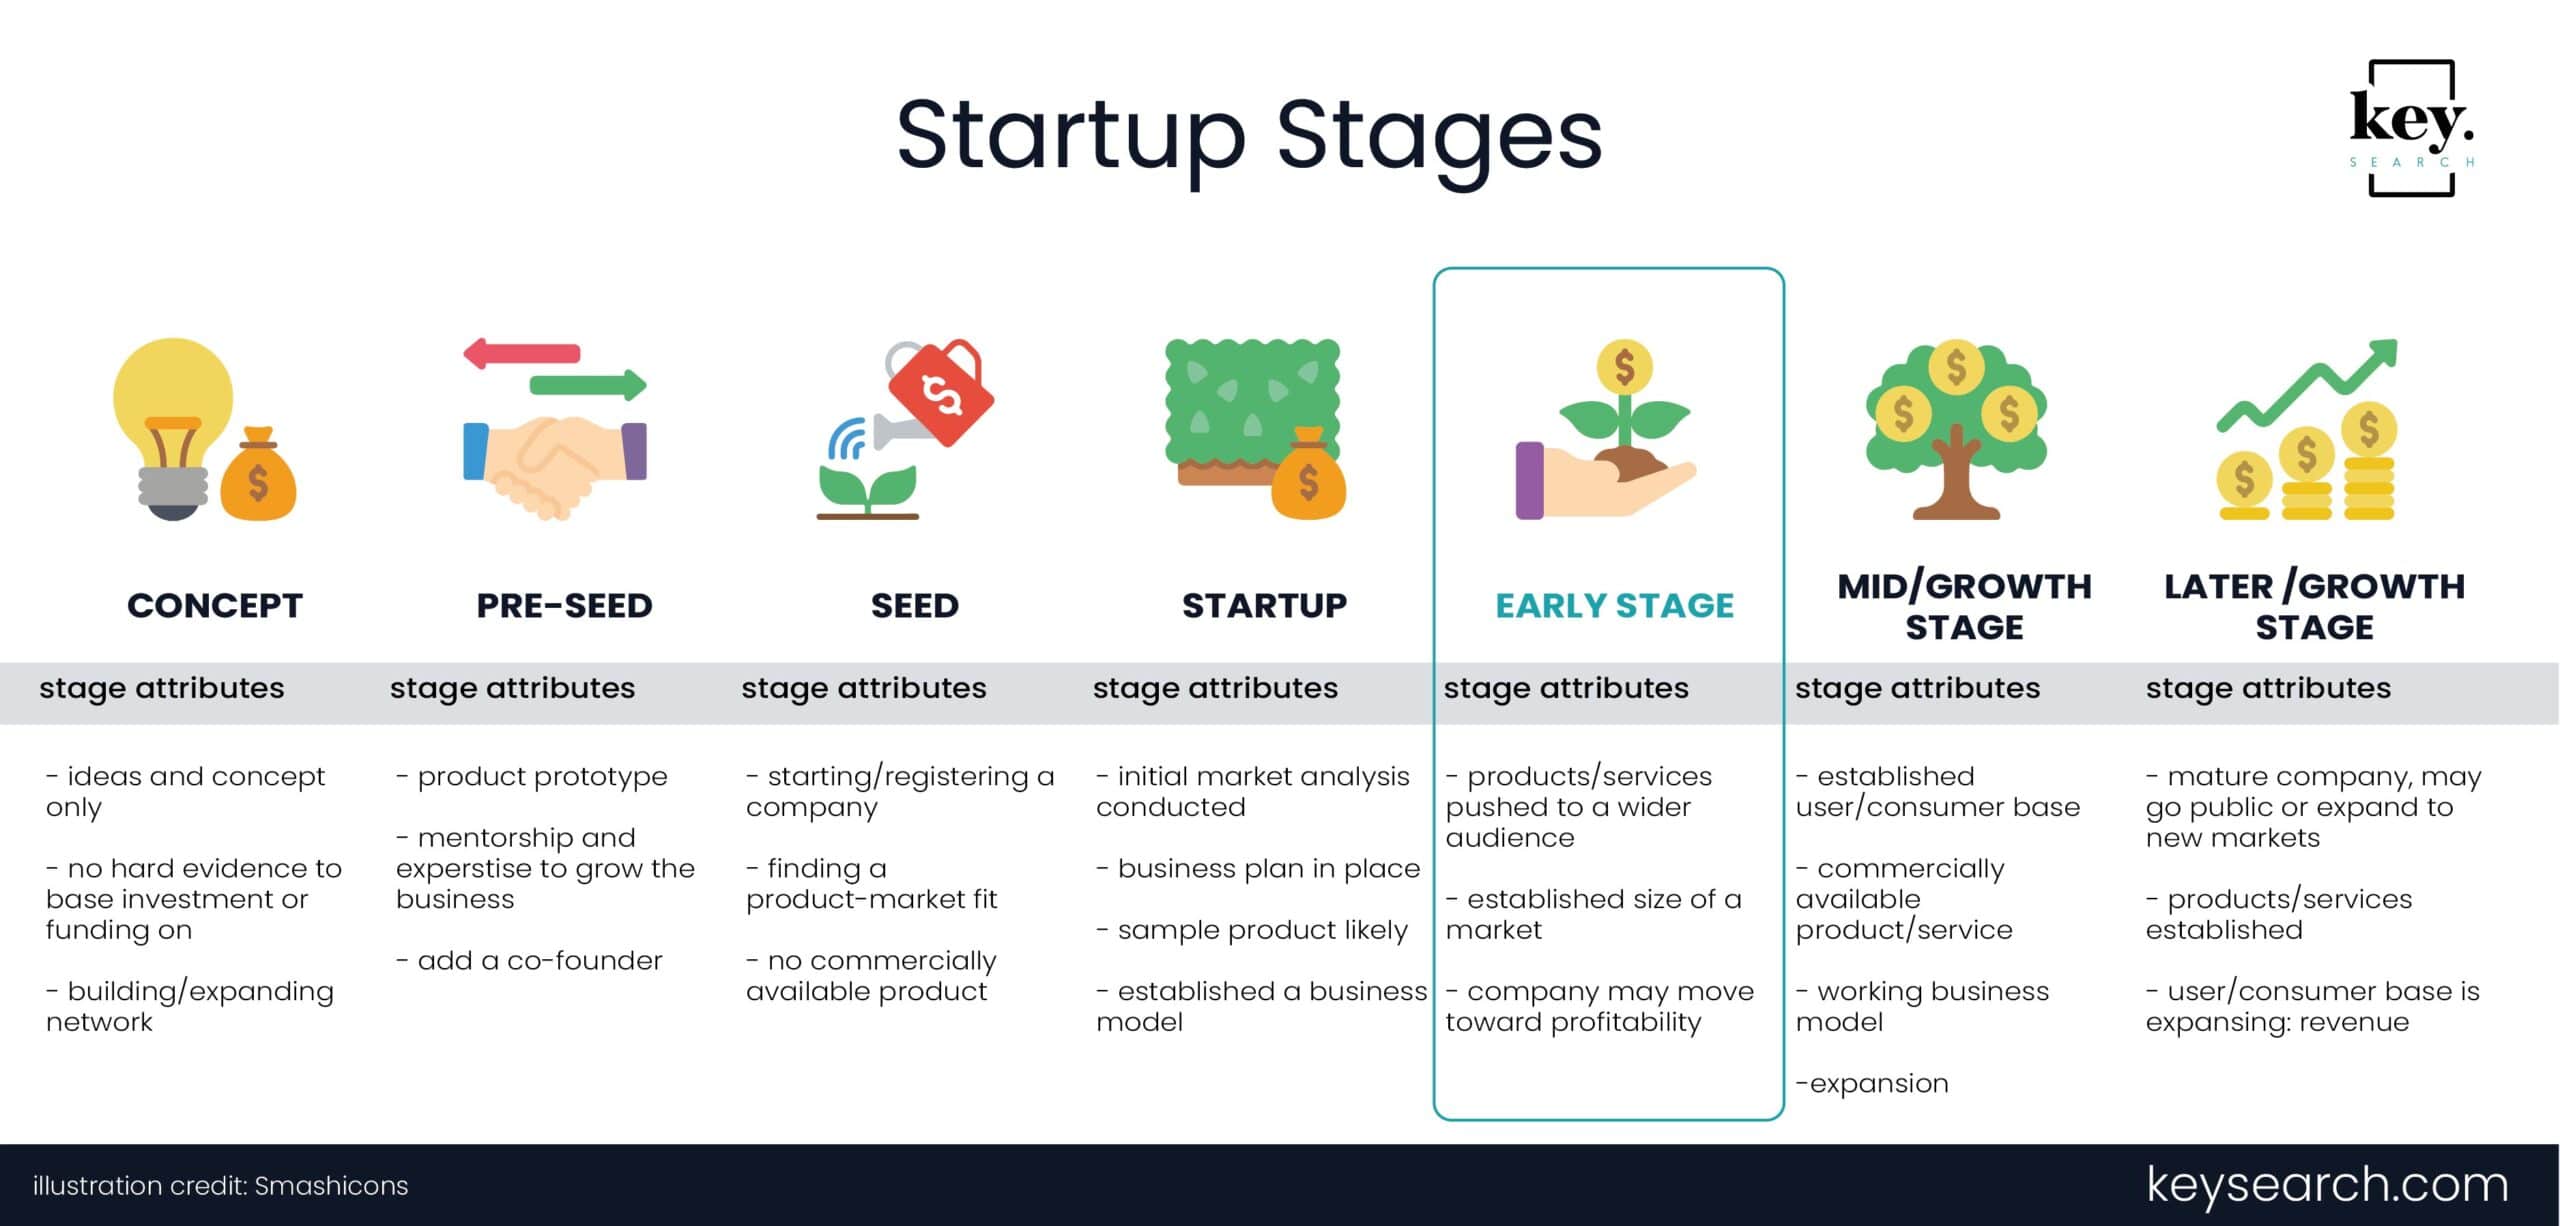 Startup stages - early stage